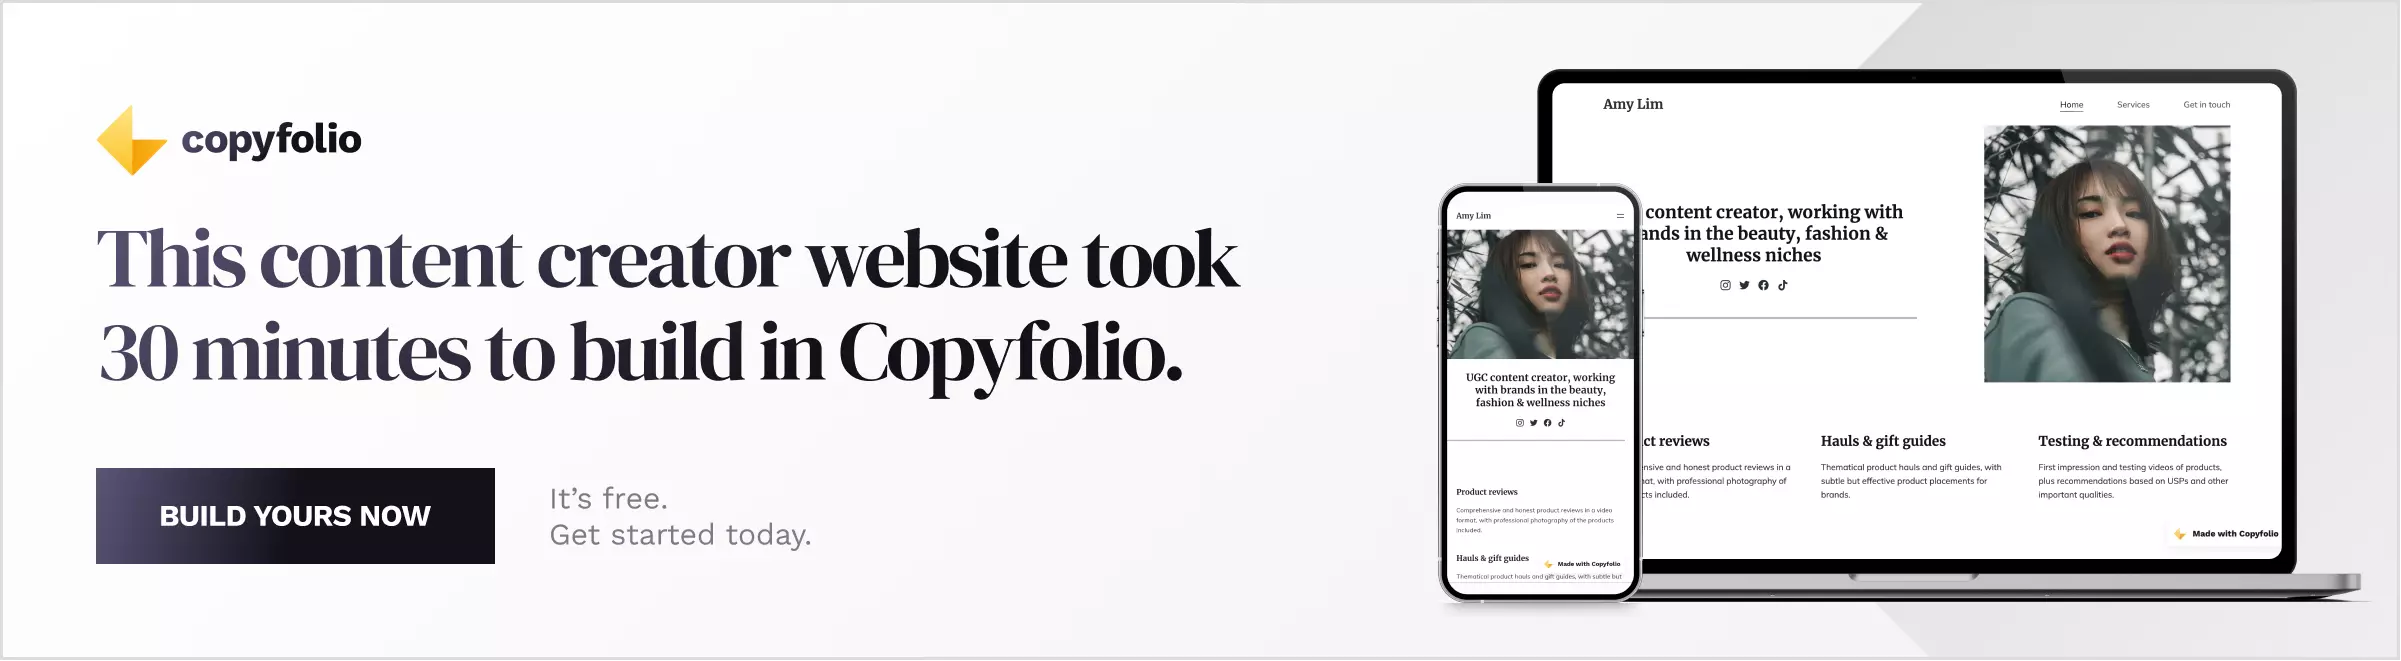 This content creator website took 30 minutes to build in Copyfolio. Build yours today. It's free.